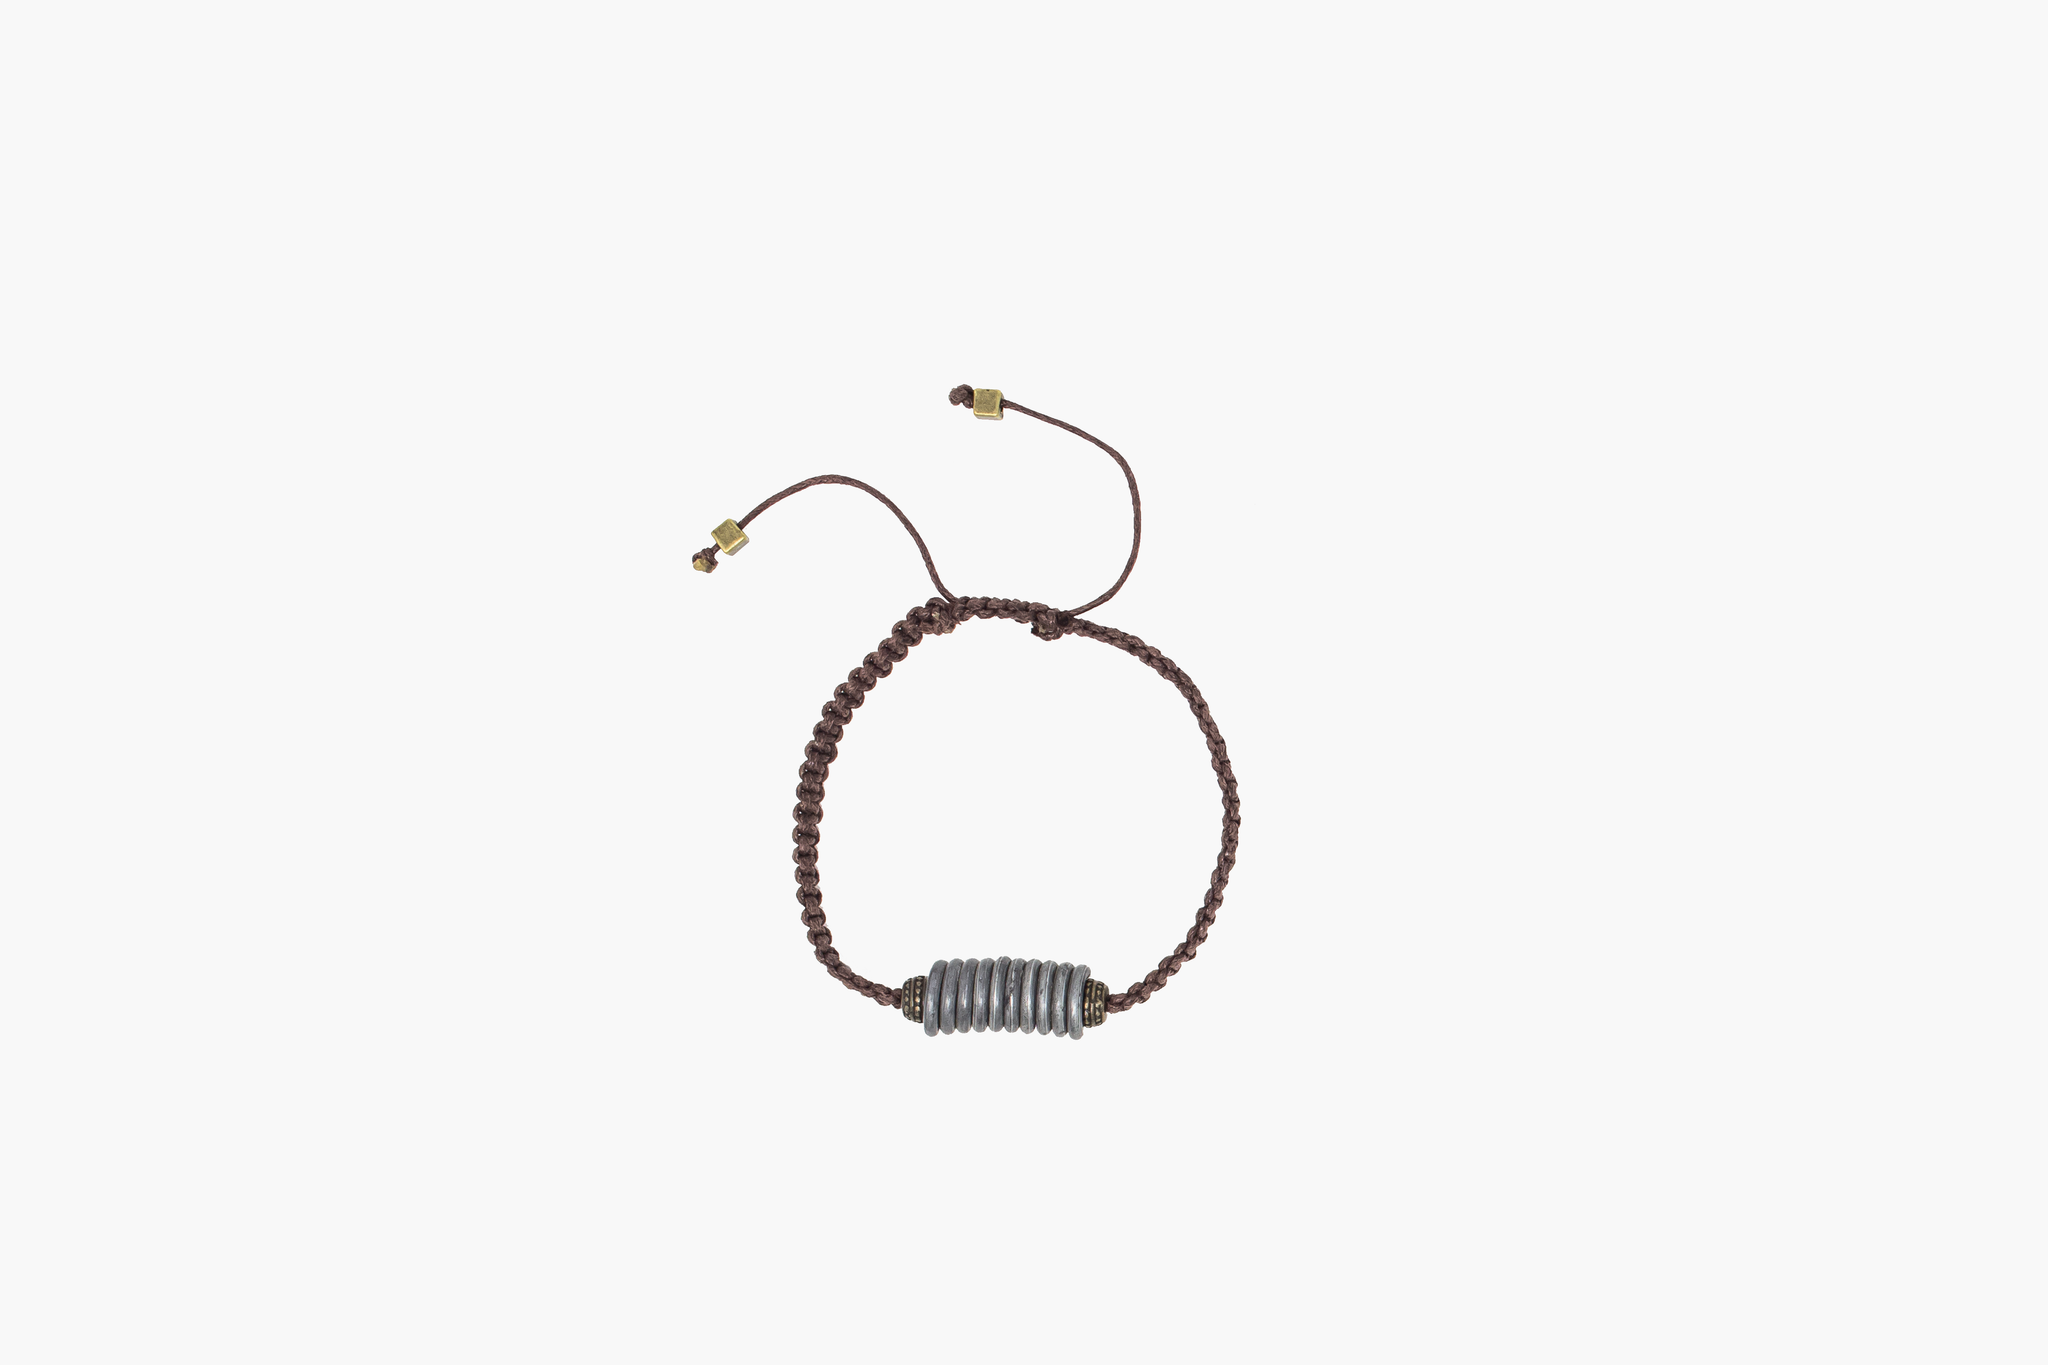 Mulberry Mongoose snare and cord bracelet in bronze mens